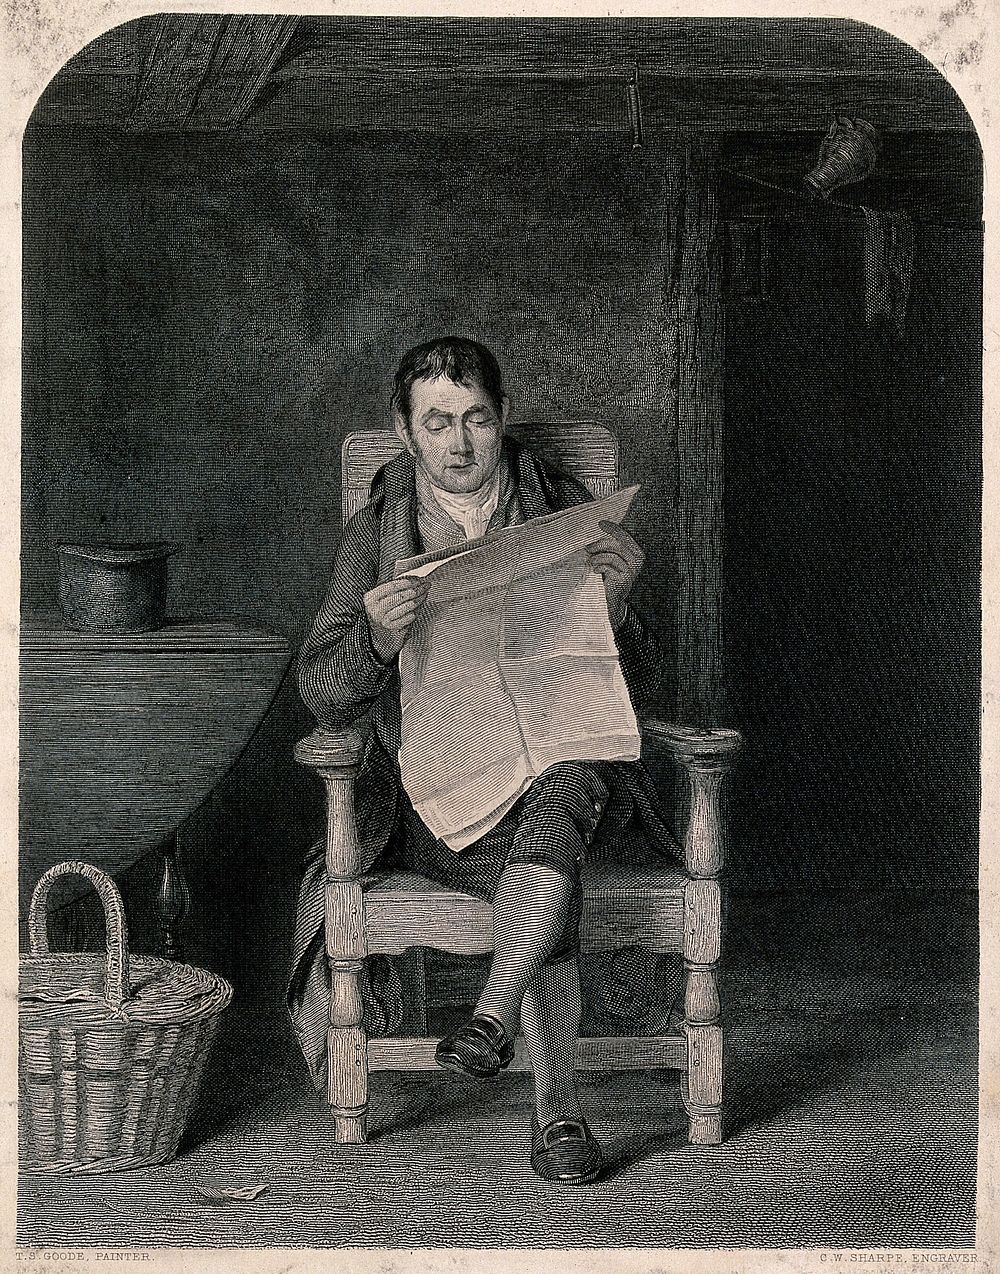 A seated man reading a newspaper in a kitchen , a basket by his feet. Engraving by C.W. Sharpe after T.S. Goode.